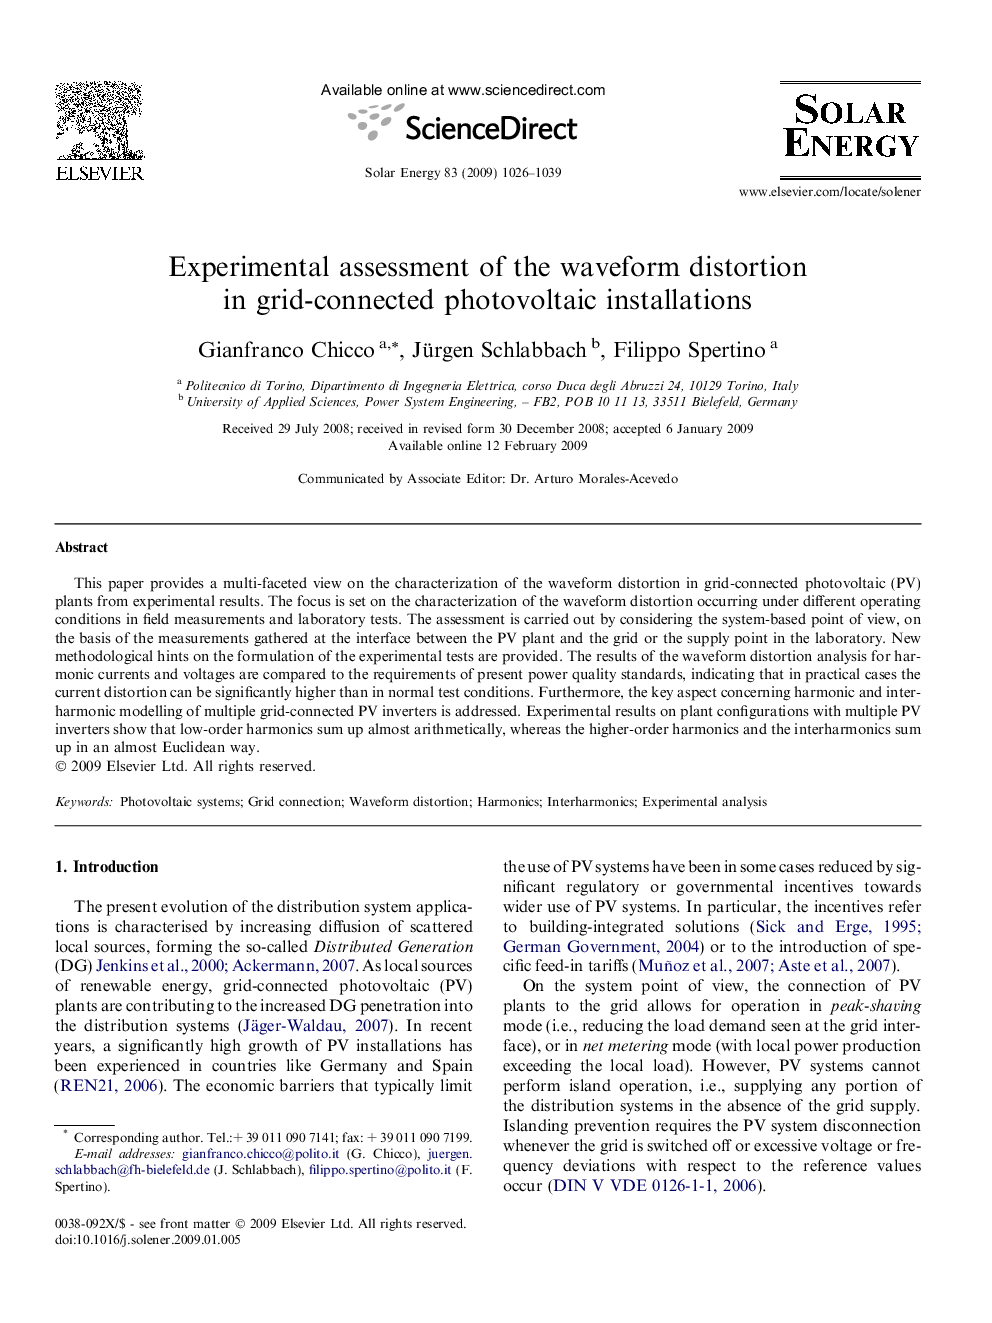 Experimental assessment of the waveform distortion in grid-connected photovoltaic installations